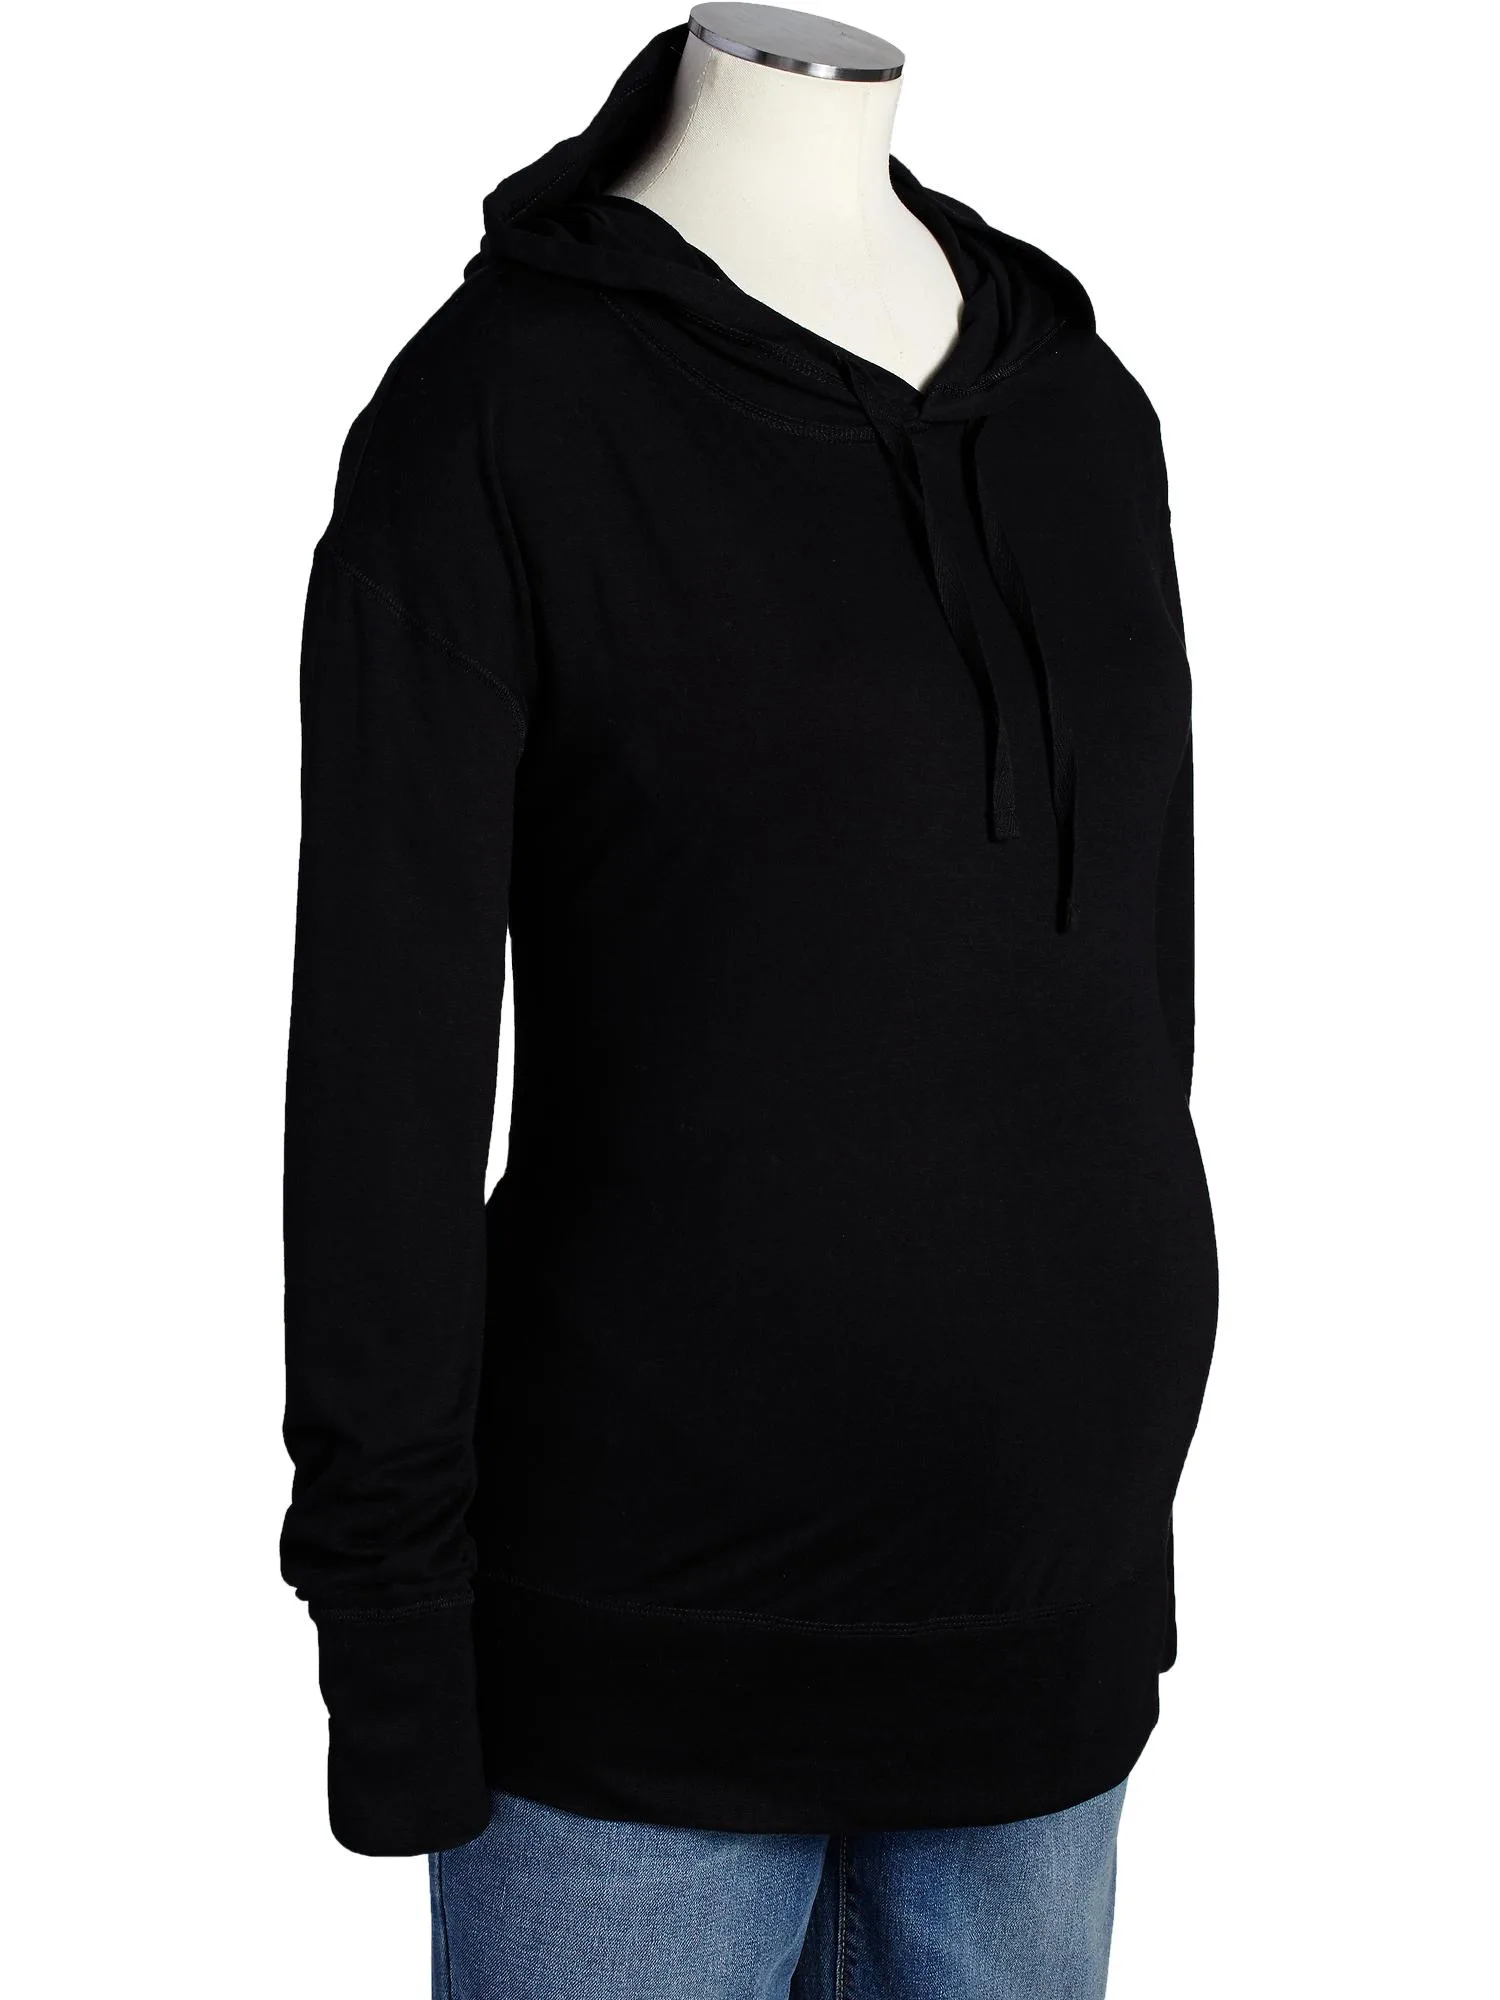 Maternity Super-Soft Hoodie from Old Navy